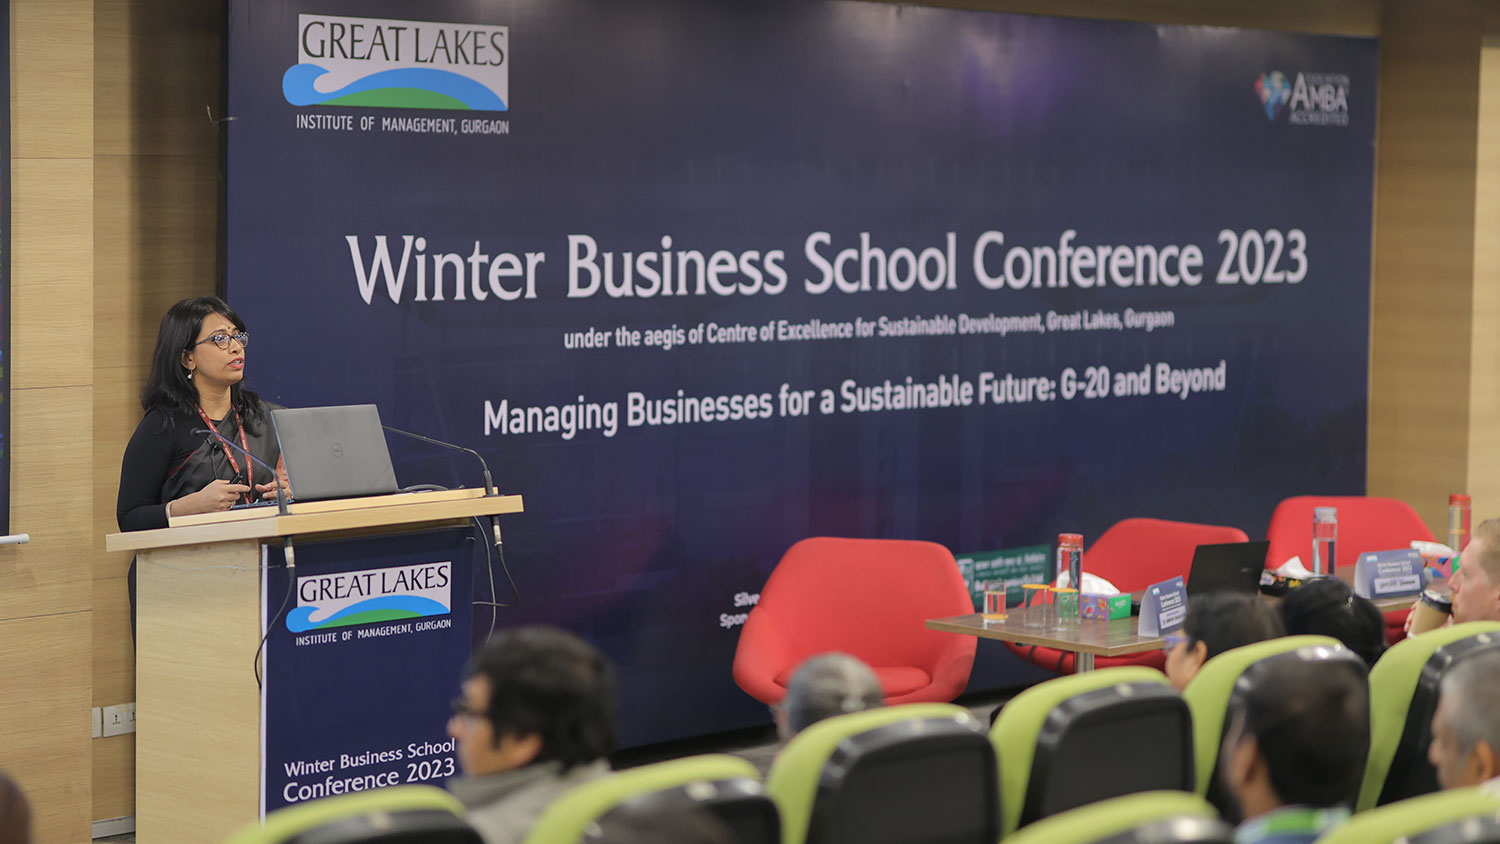 Winter Business School Conference 2023